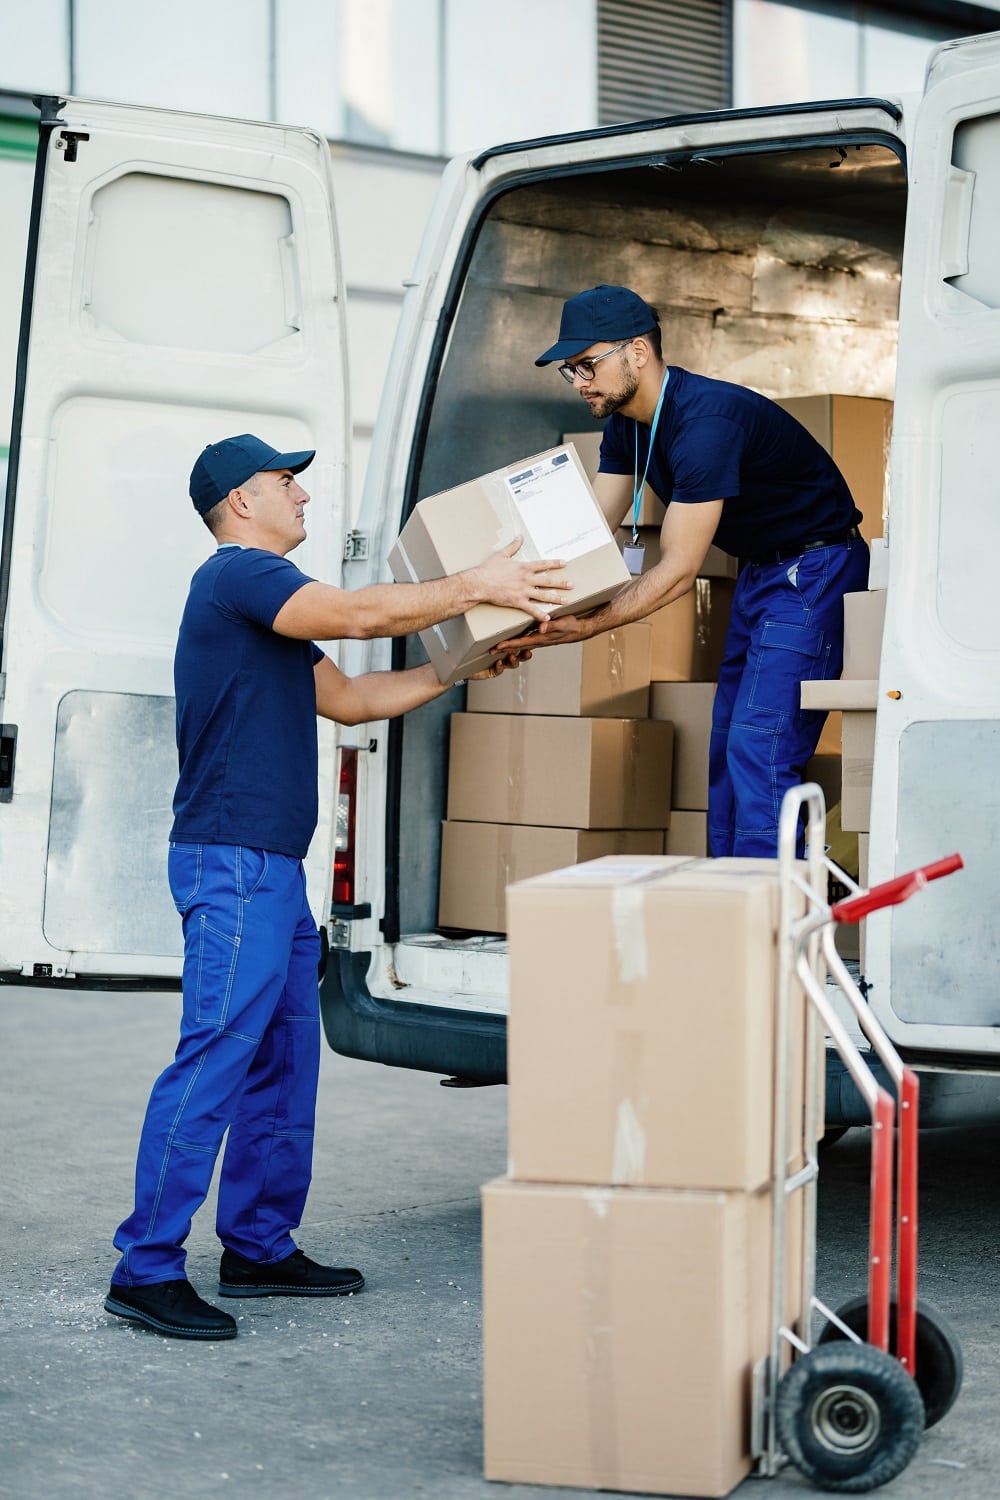 Male workers cooperating while loading cardboard boxes in a delivery van